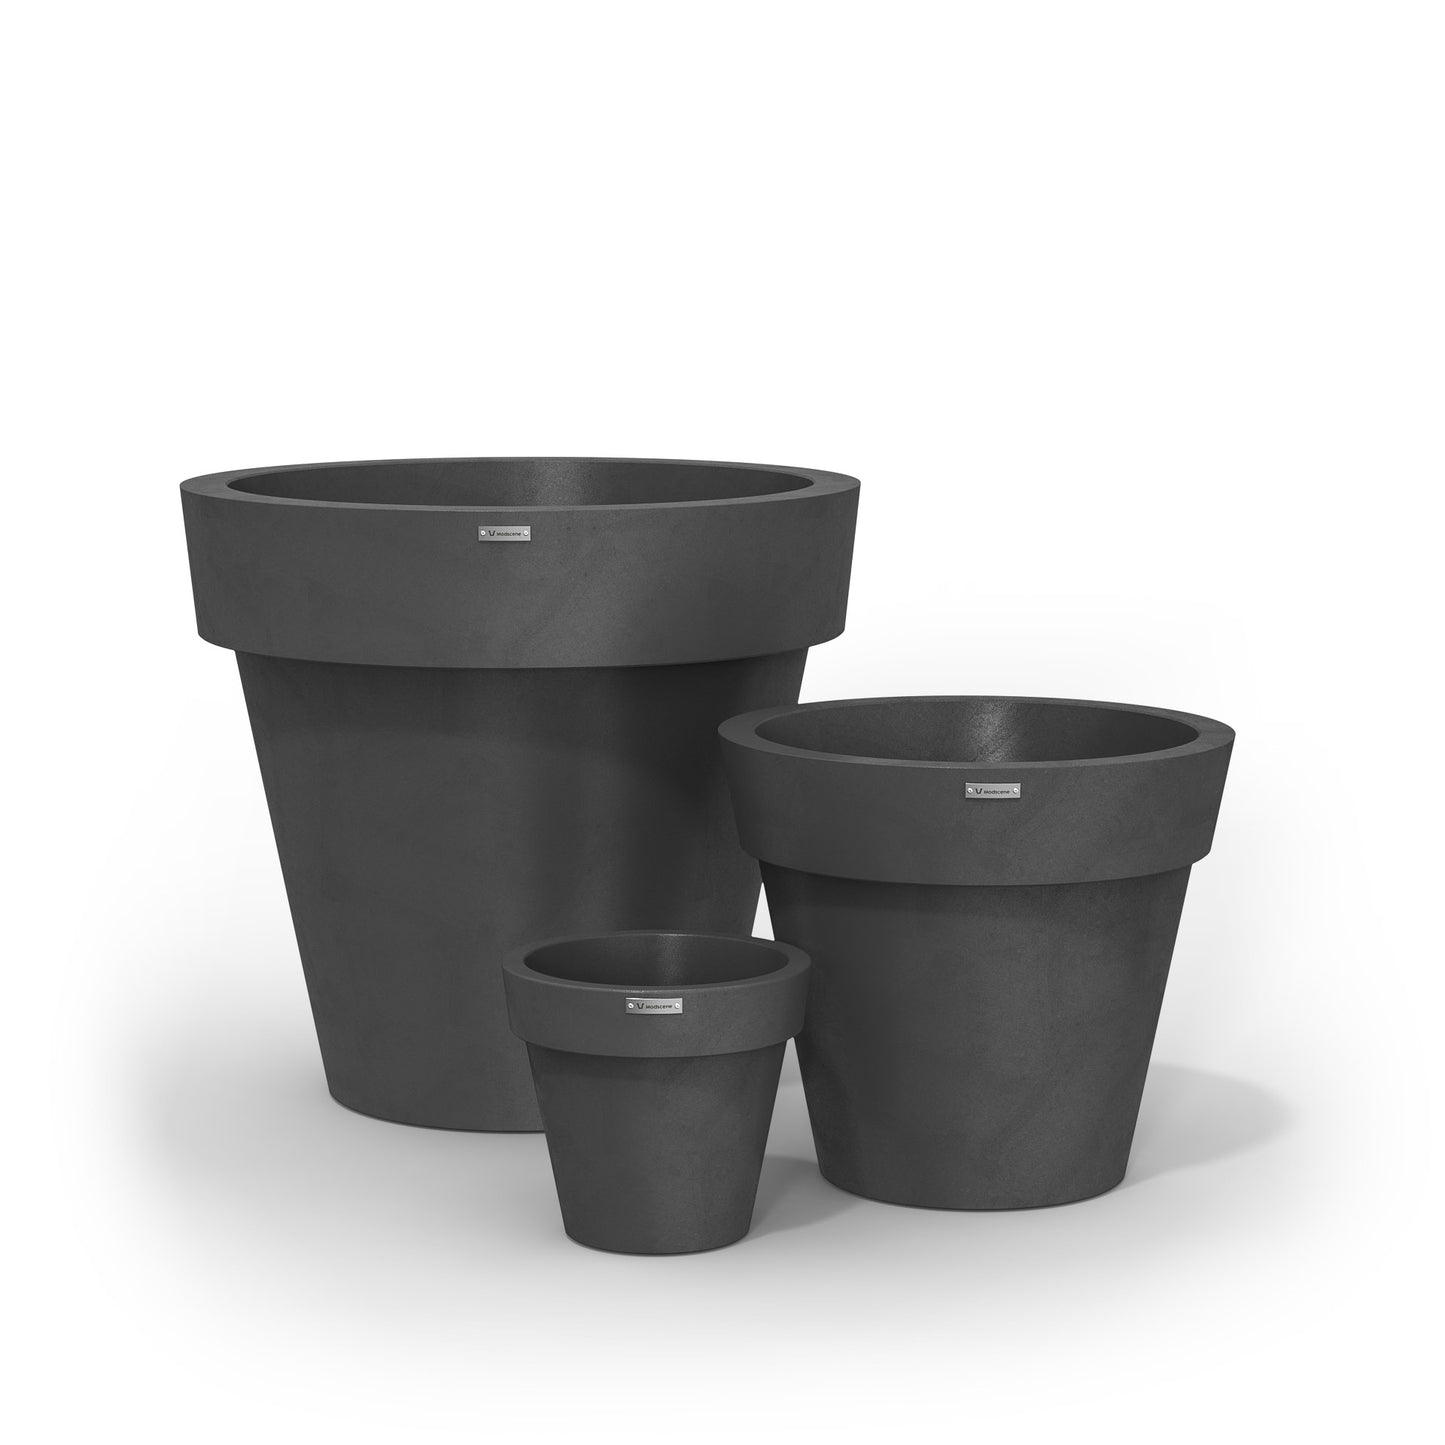 A cluster of three Modscene planter pots in a dark grey colour with a concrete finish.